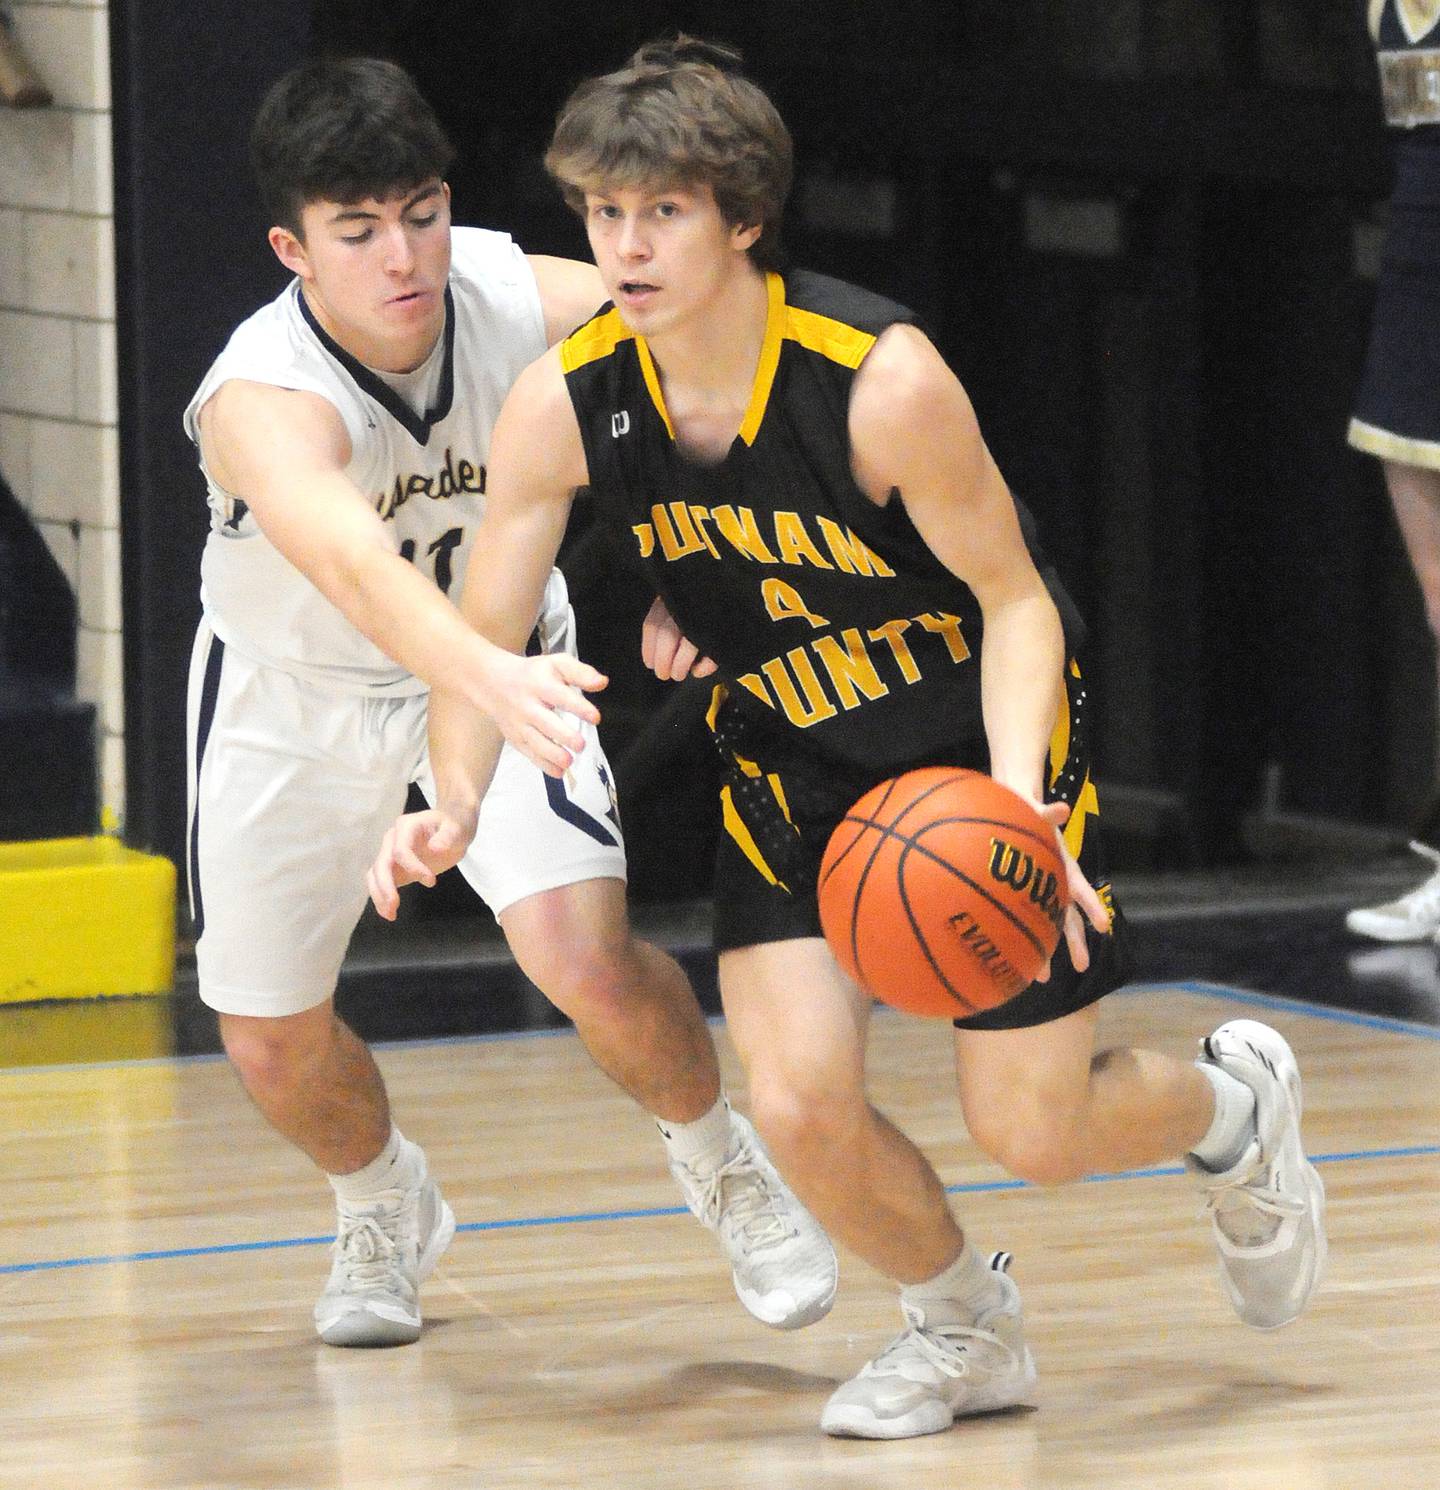 Marquette's Carson Zellers applies pressure to Putnam County's Blake Billups at Bader Gymnasium on Friday, Feb. 3, 2023.